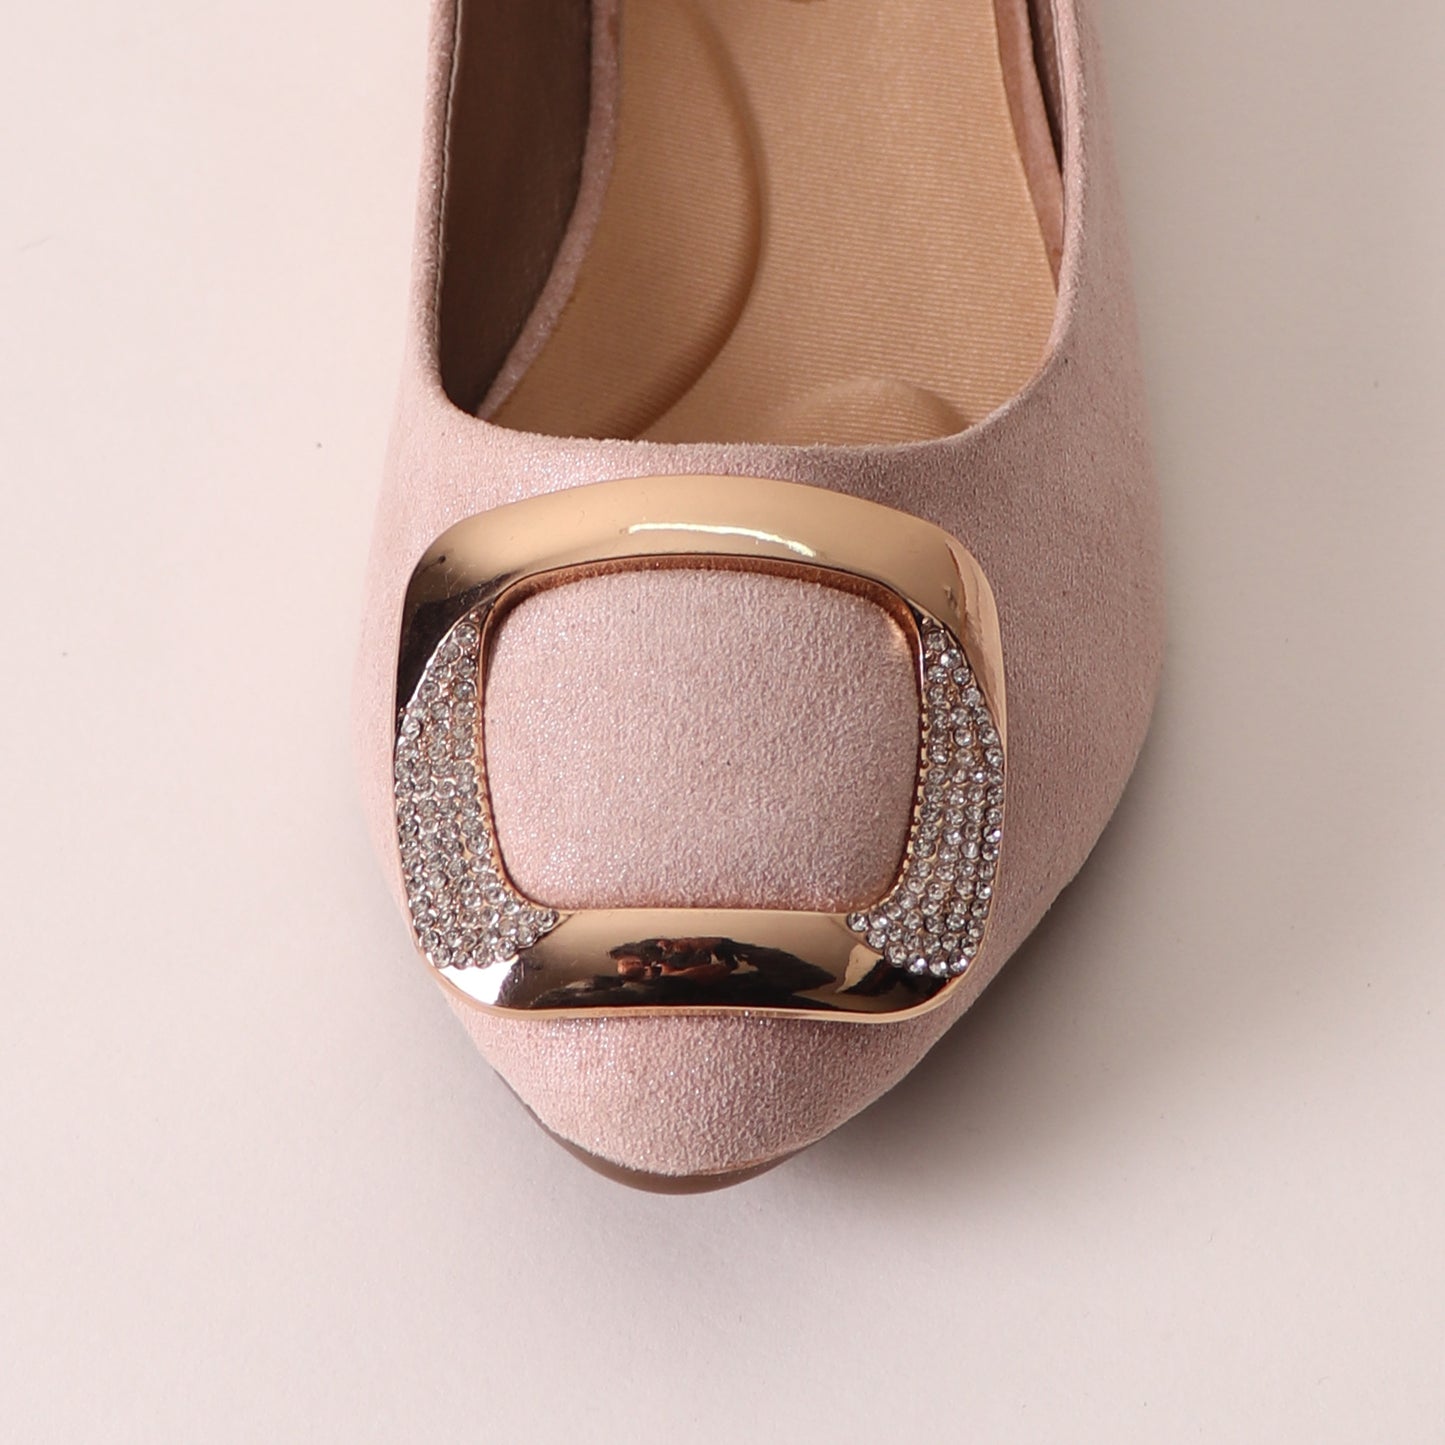 Foot Wear,Everyday Fun Flats in Baby Pink - Cippele Multi Store